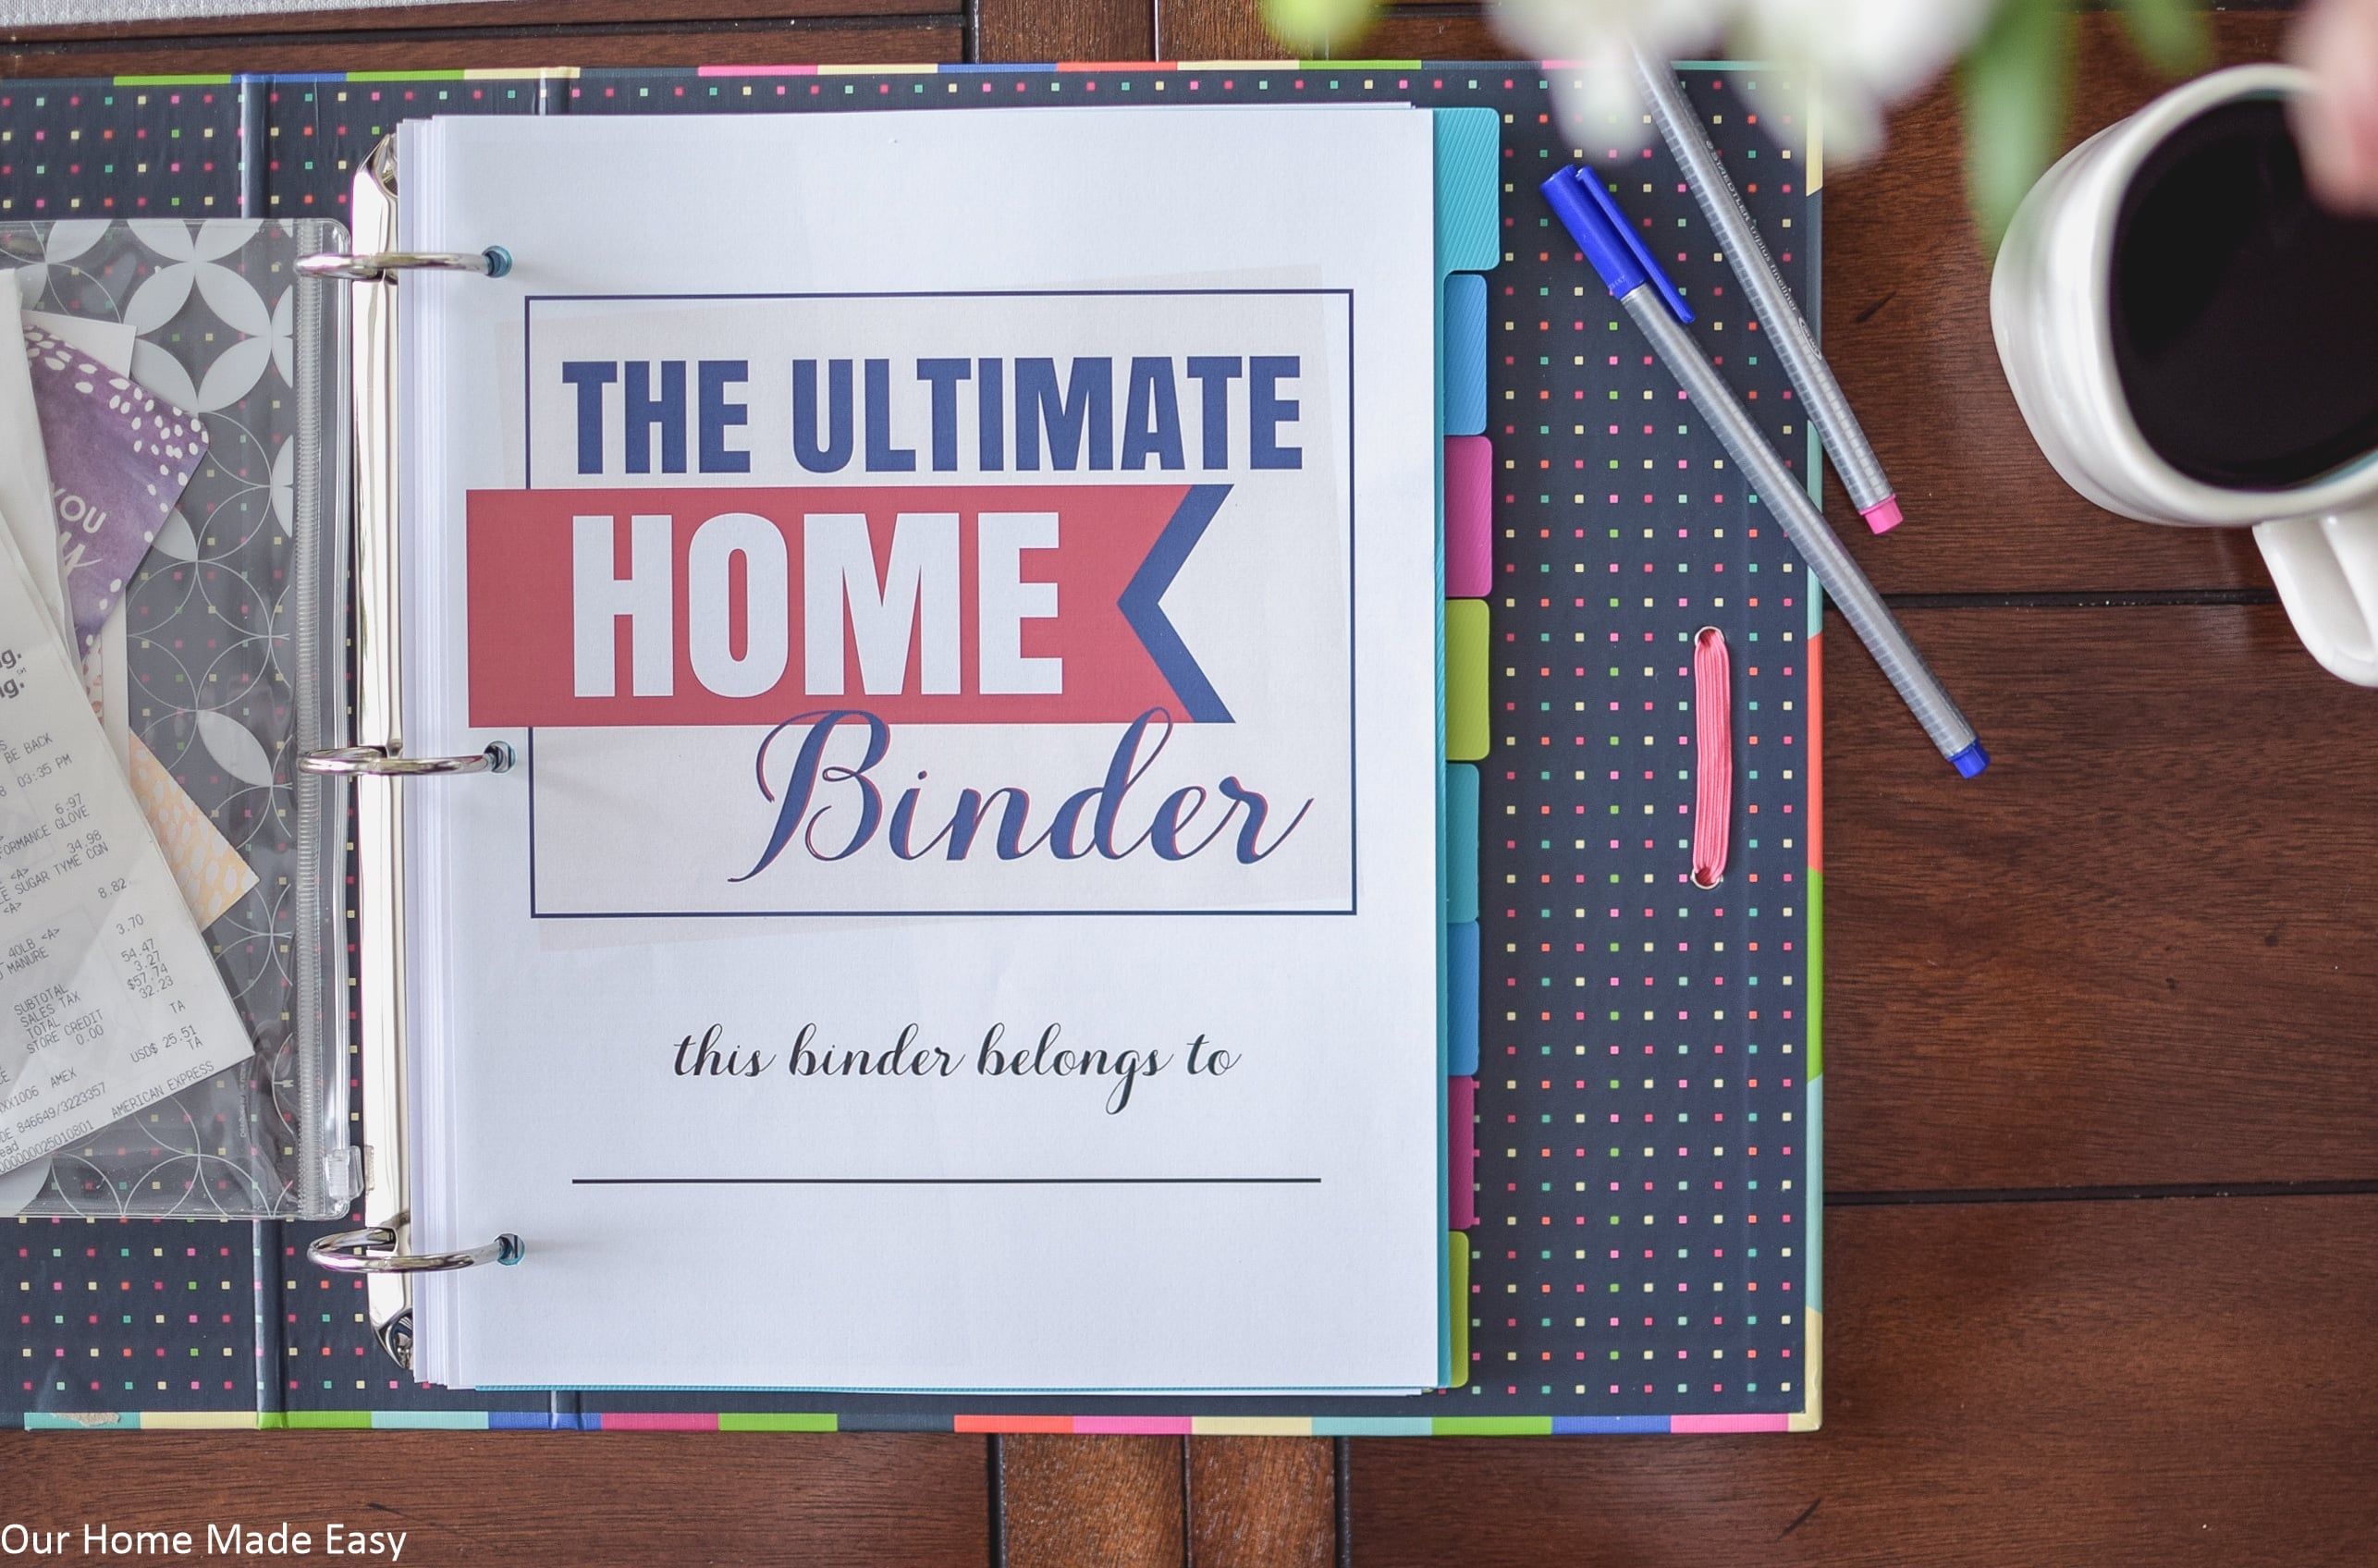 The Ultimate Home Binder is the best way to organize your whole at-home life